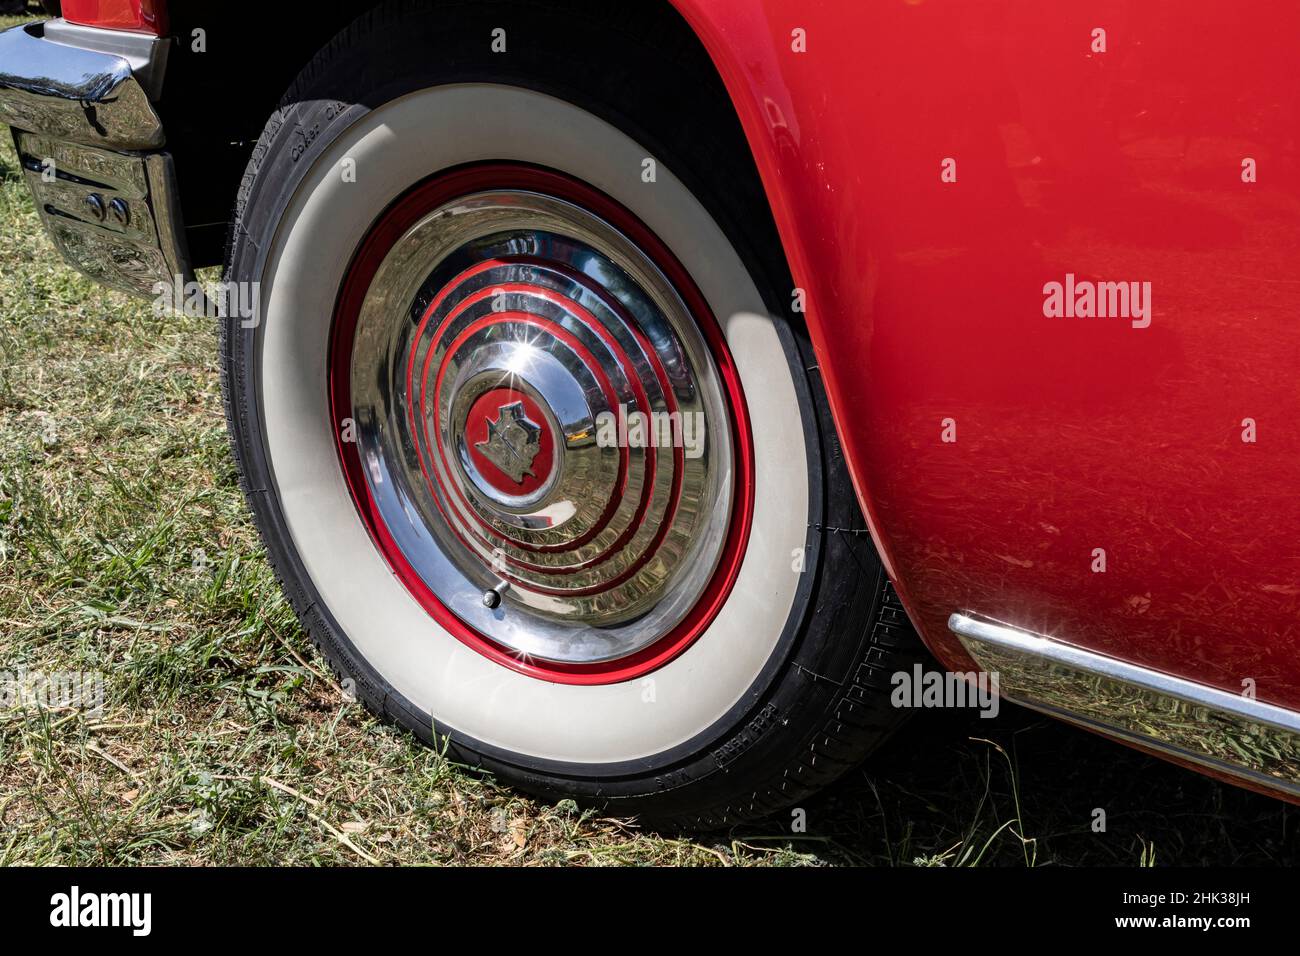 Marble Falls, Texas, USA. Whitewall tires and chrome hubcap on a vintage Mercury Monterey. (Editorial Use Only) Stock Photo